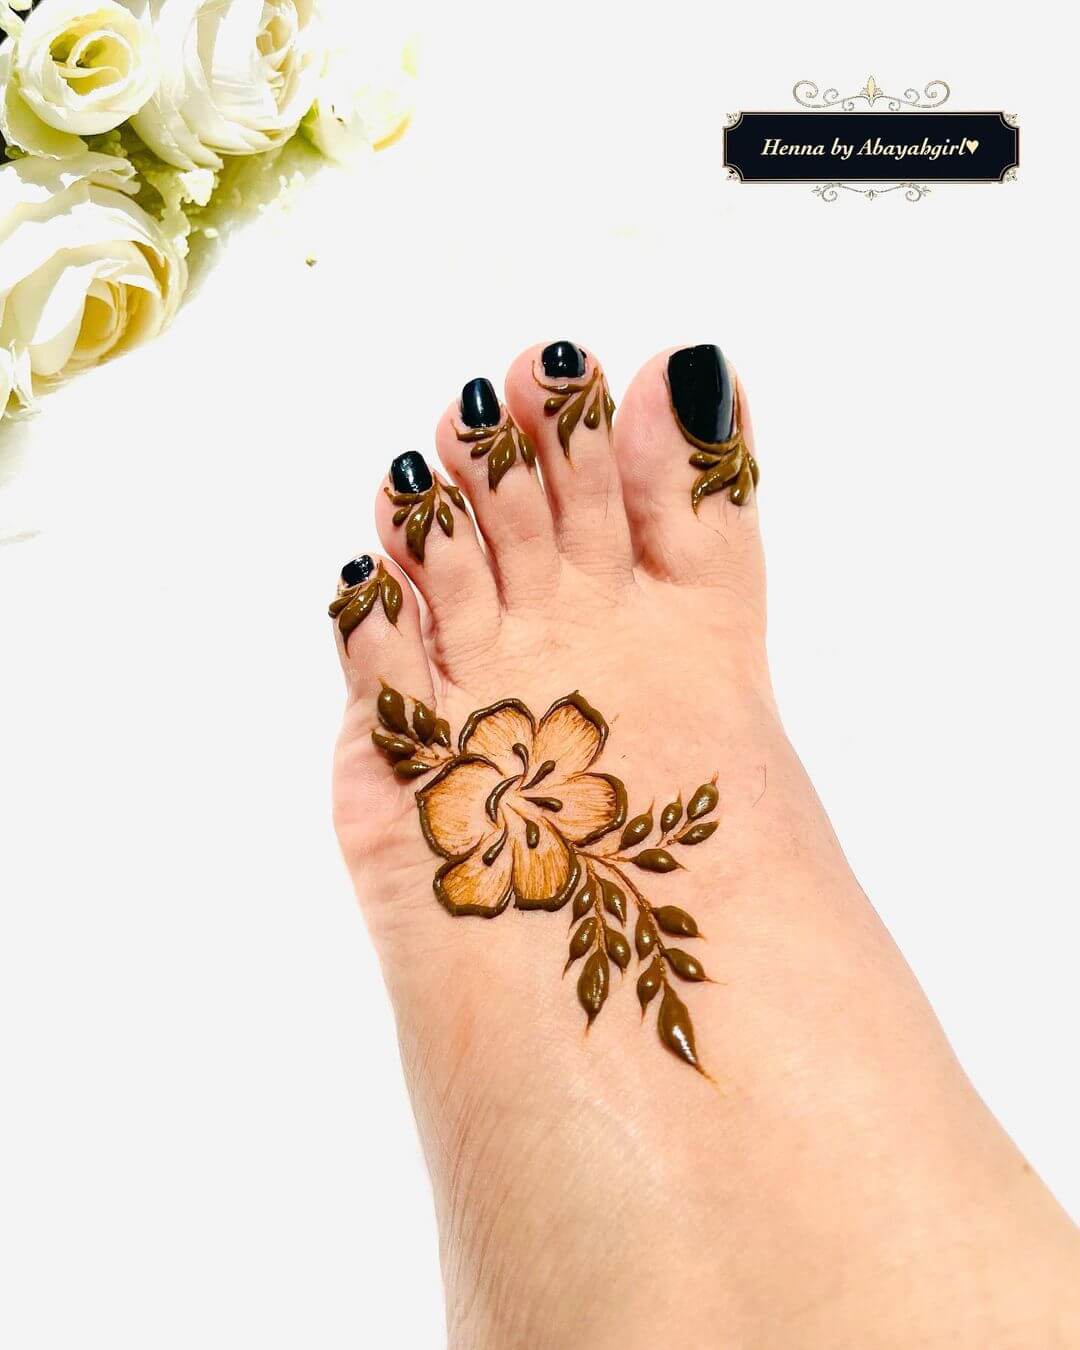 Beautiful Floral Mehendi Design For Feet And Toes Beautiful Floral Mehendi Design For Feet And Toes